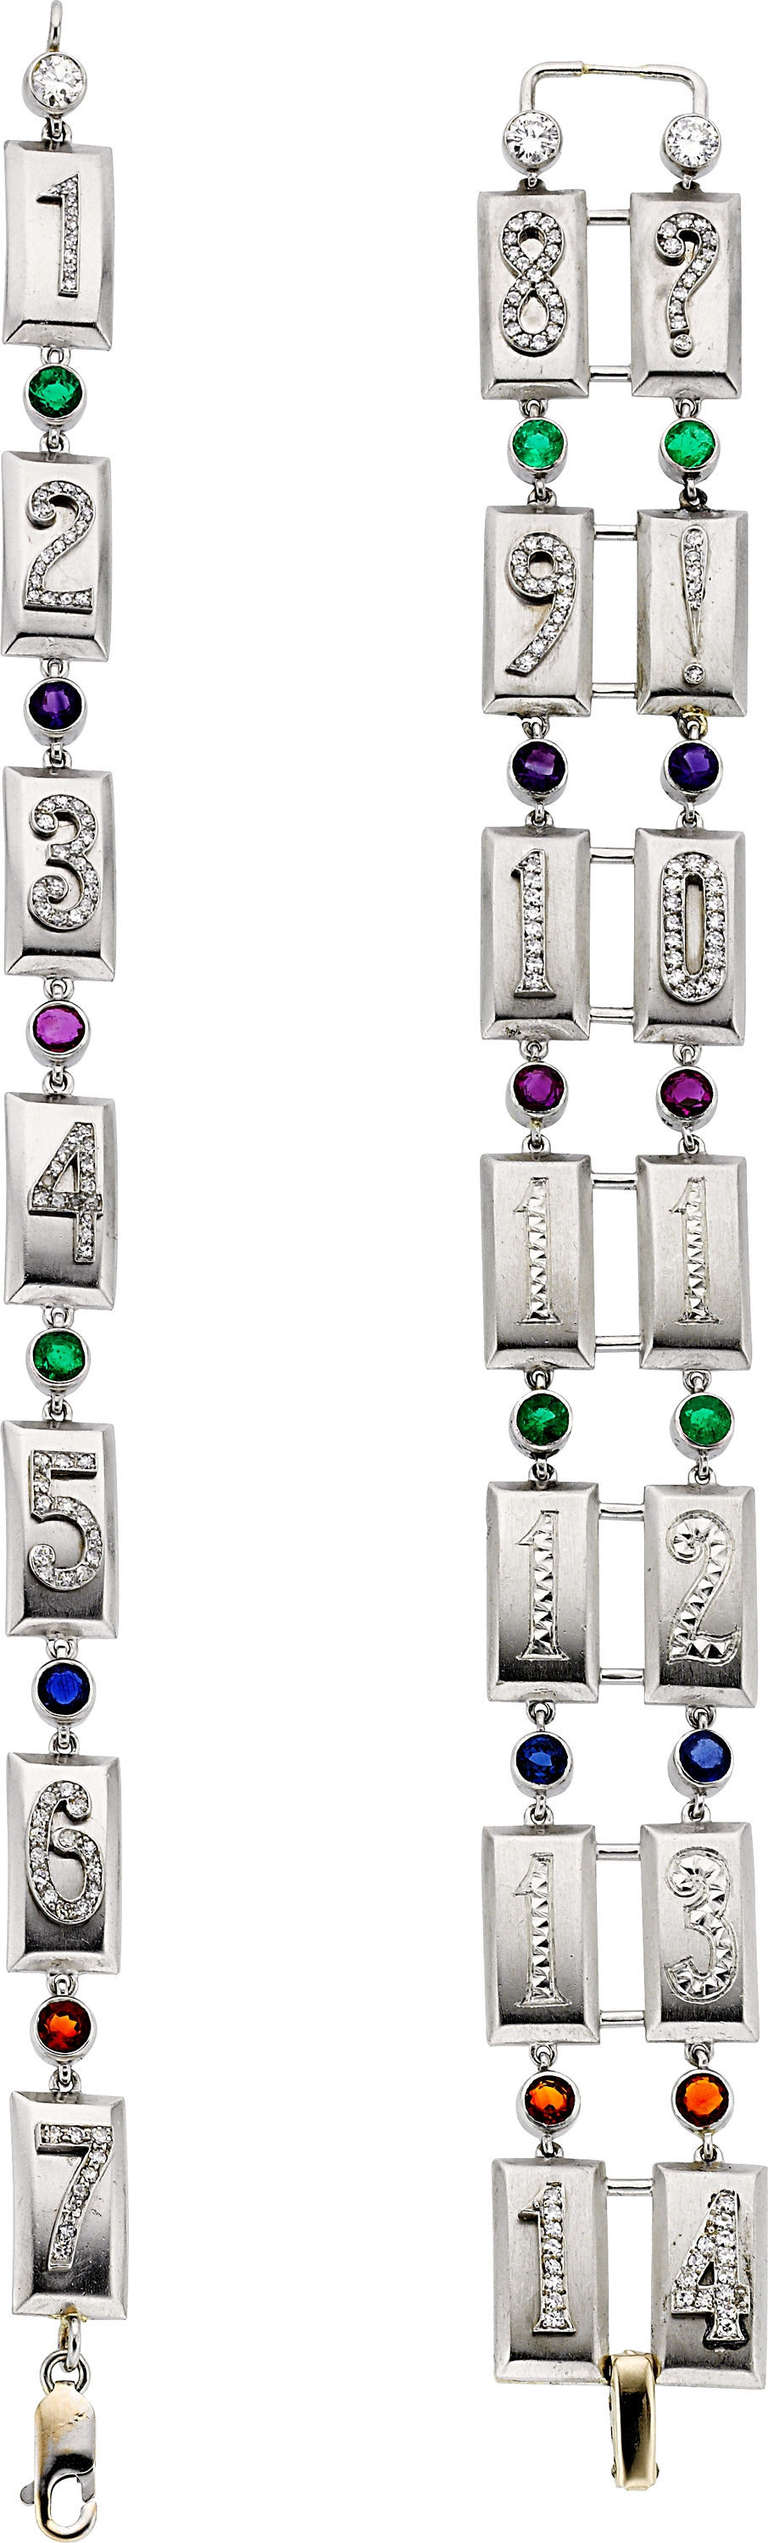 These one of a kind 'regard' bracelets feature round brilliant-cut diamonds weighing a total of approximately 0.75 carat, enhanced by single-cut diamonds weighing a total of approximately 0.95 carat, accented by round-shaped emeralds, amethyst,